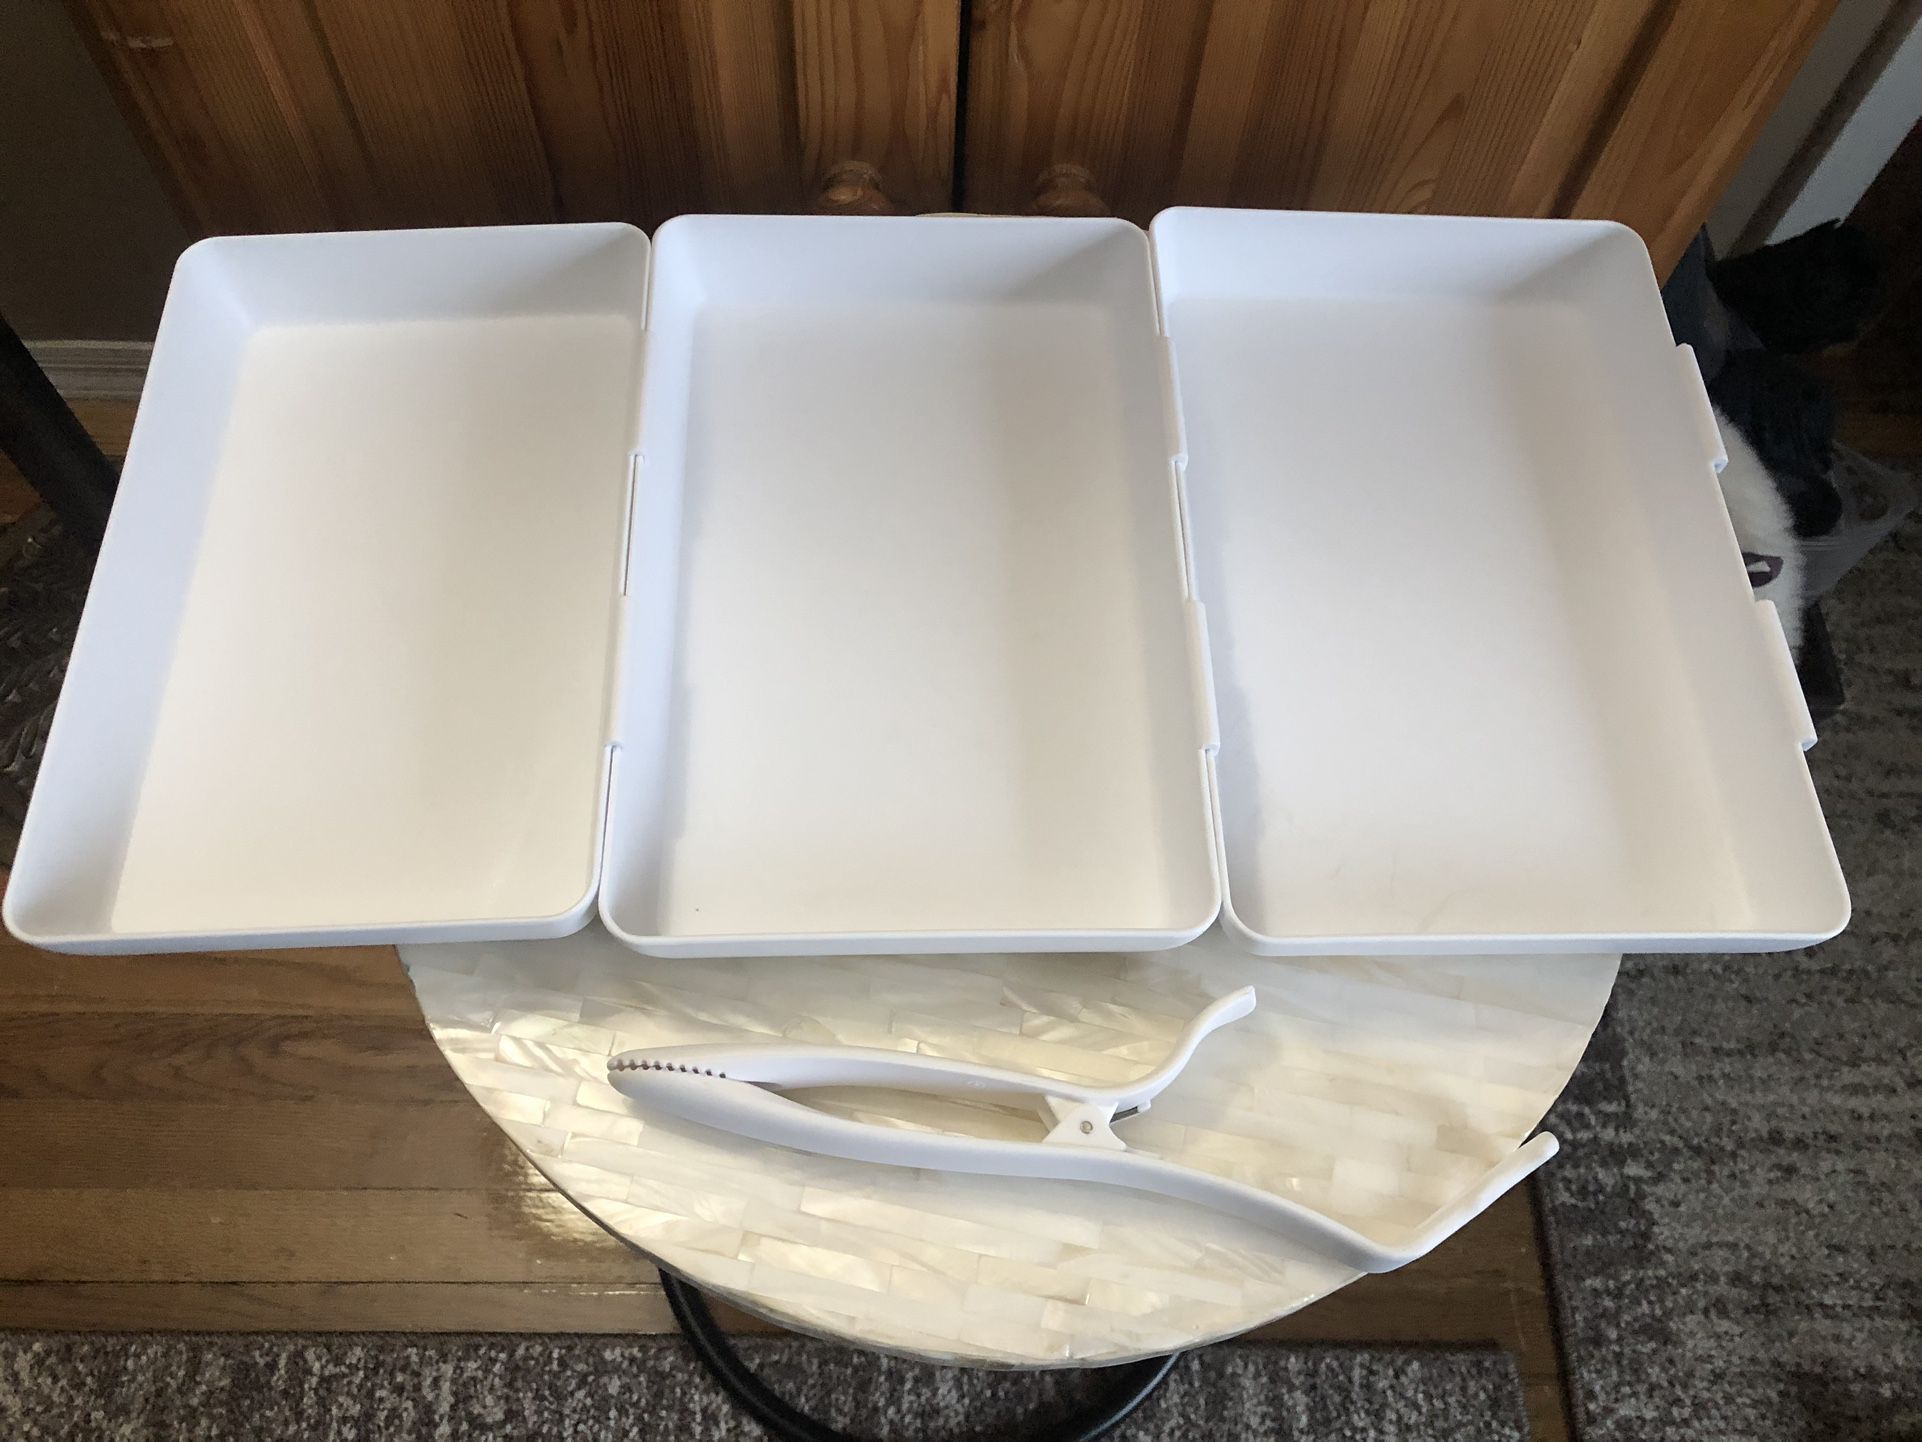 The Pampered Chef Coating Trays and Tool